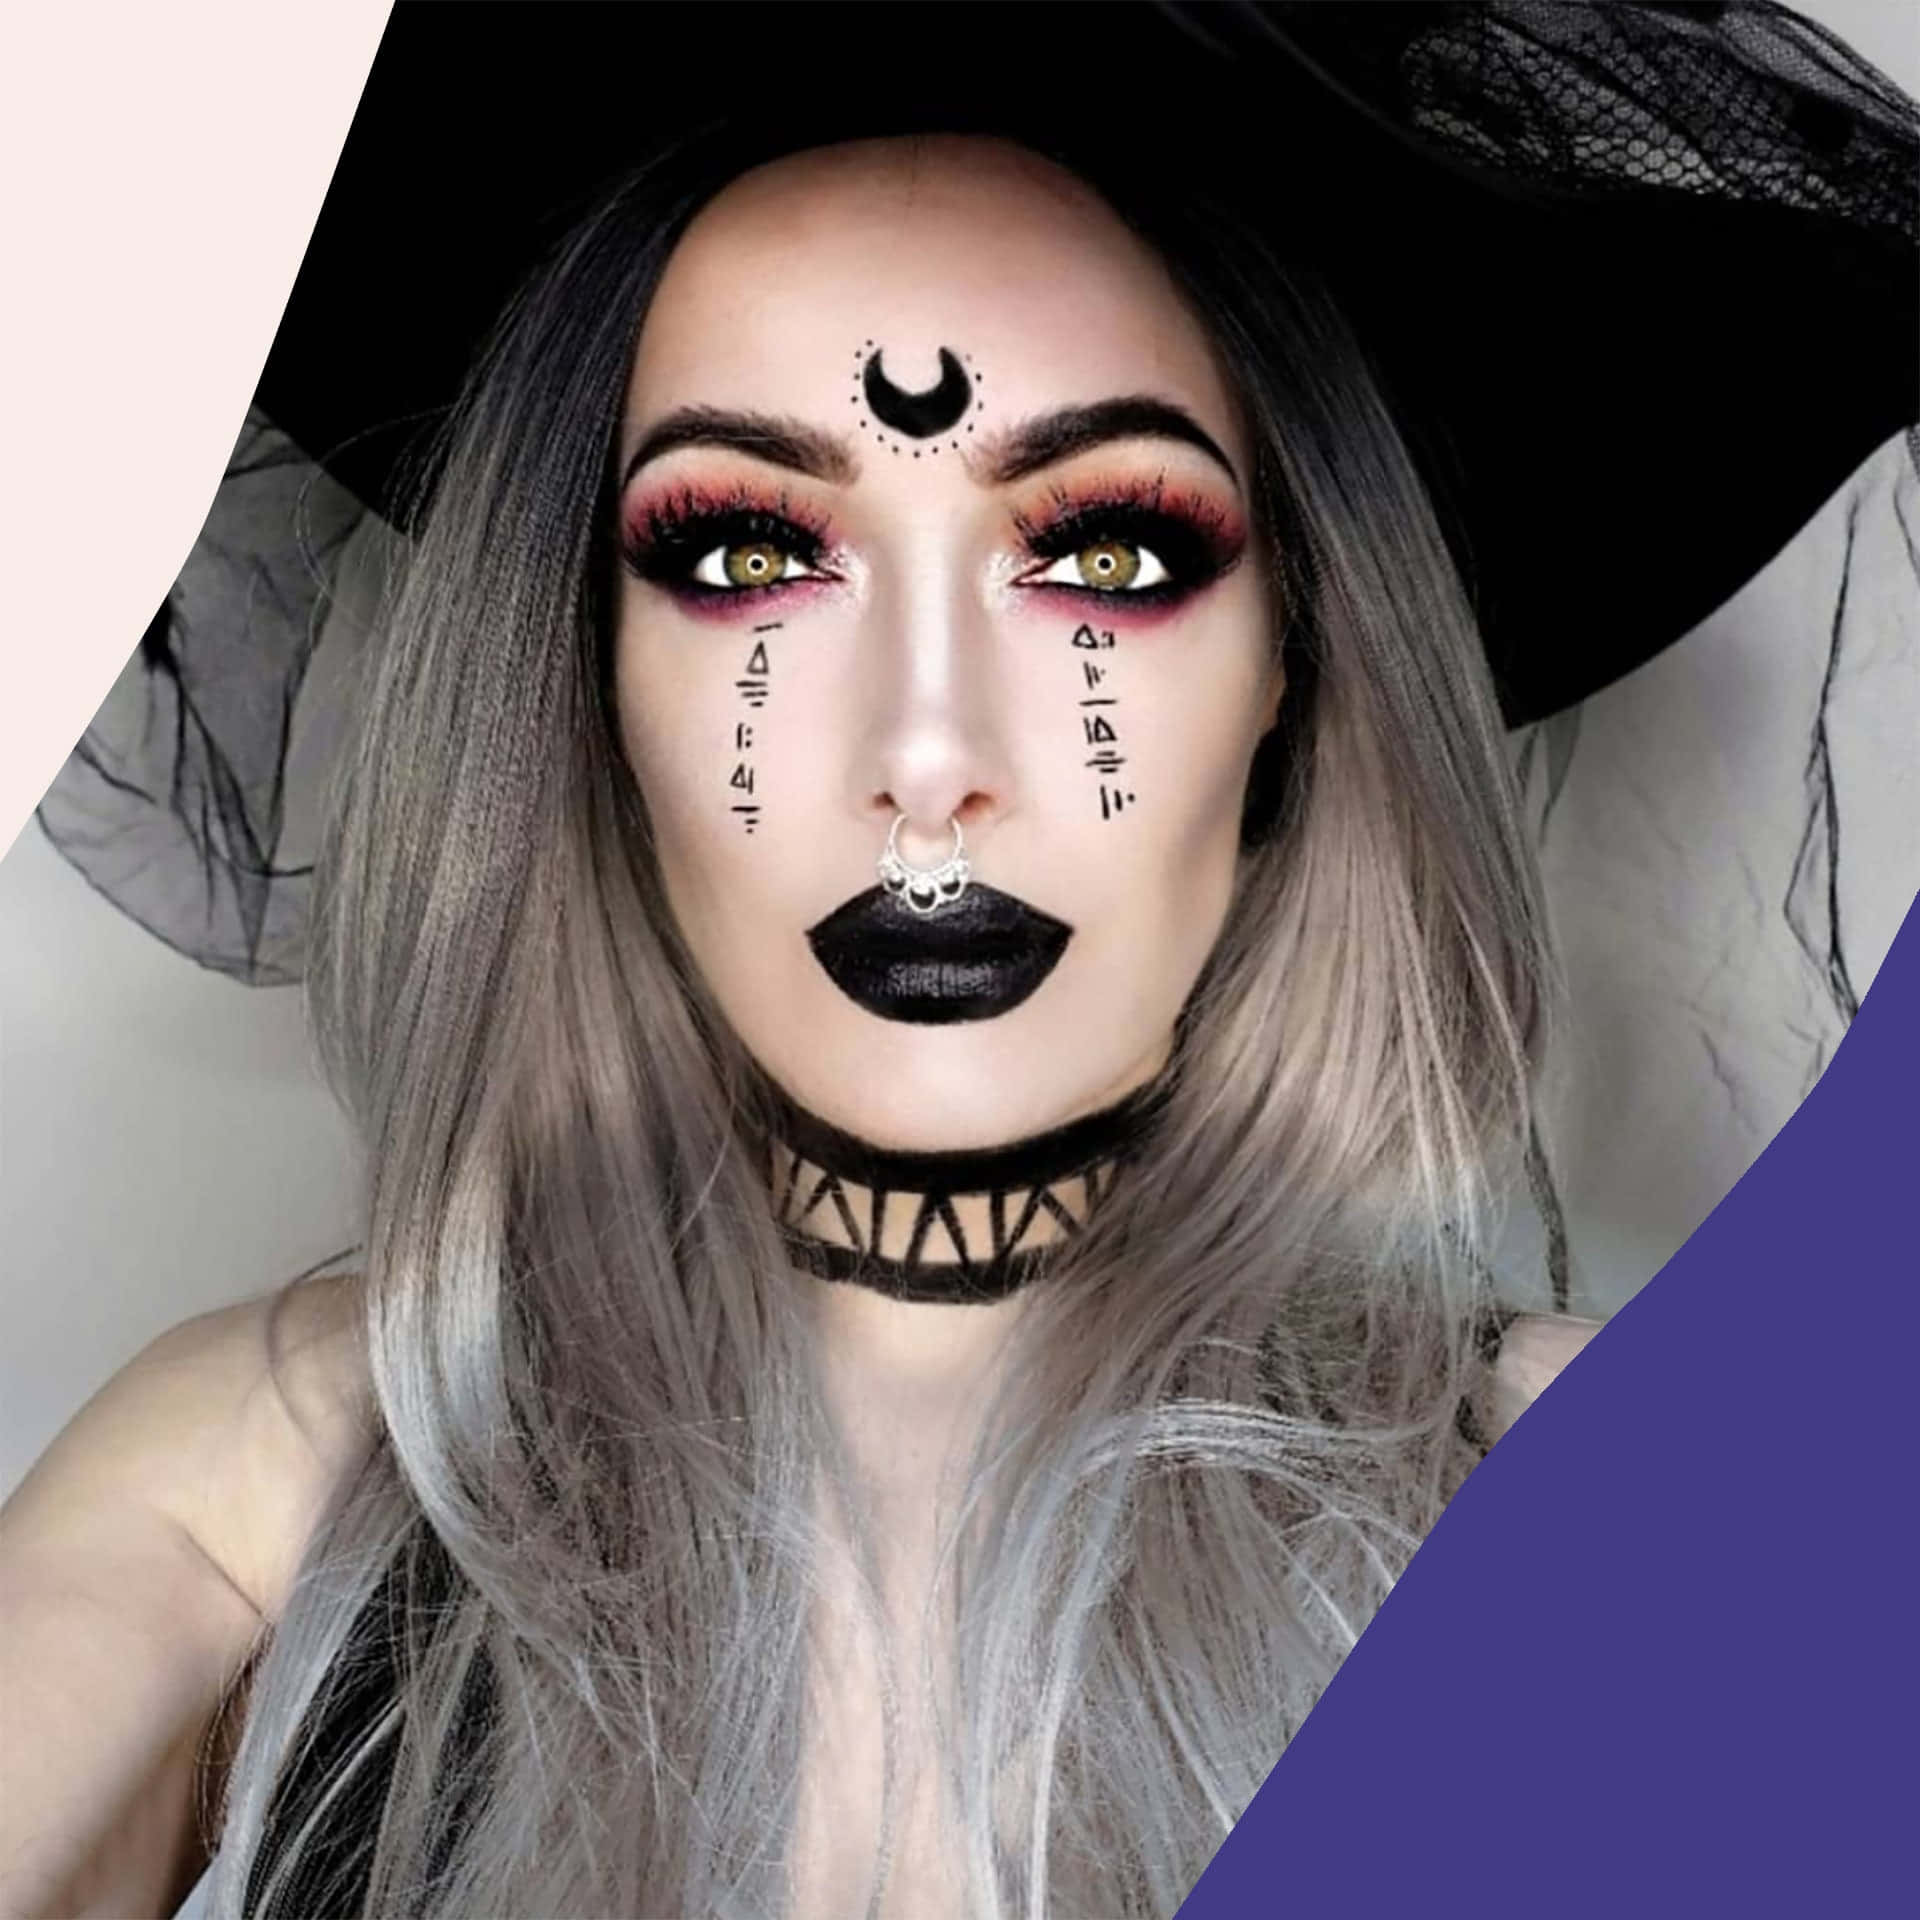 Achieve the perfect spooky look this Halloween with this bold and creative makeup look. Wallpaper